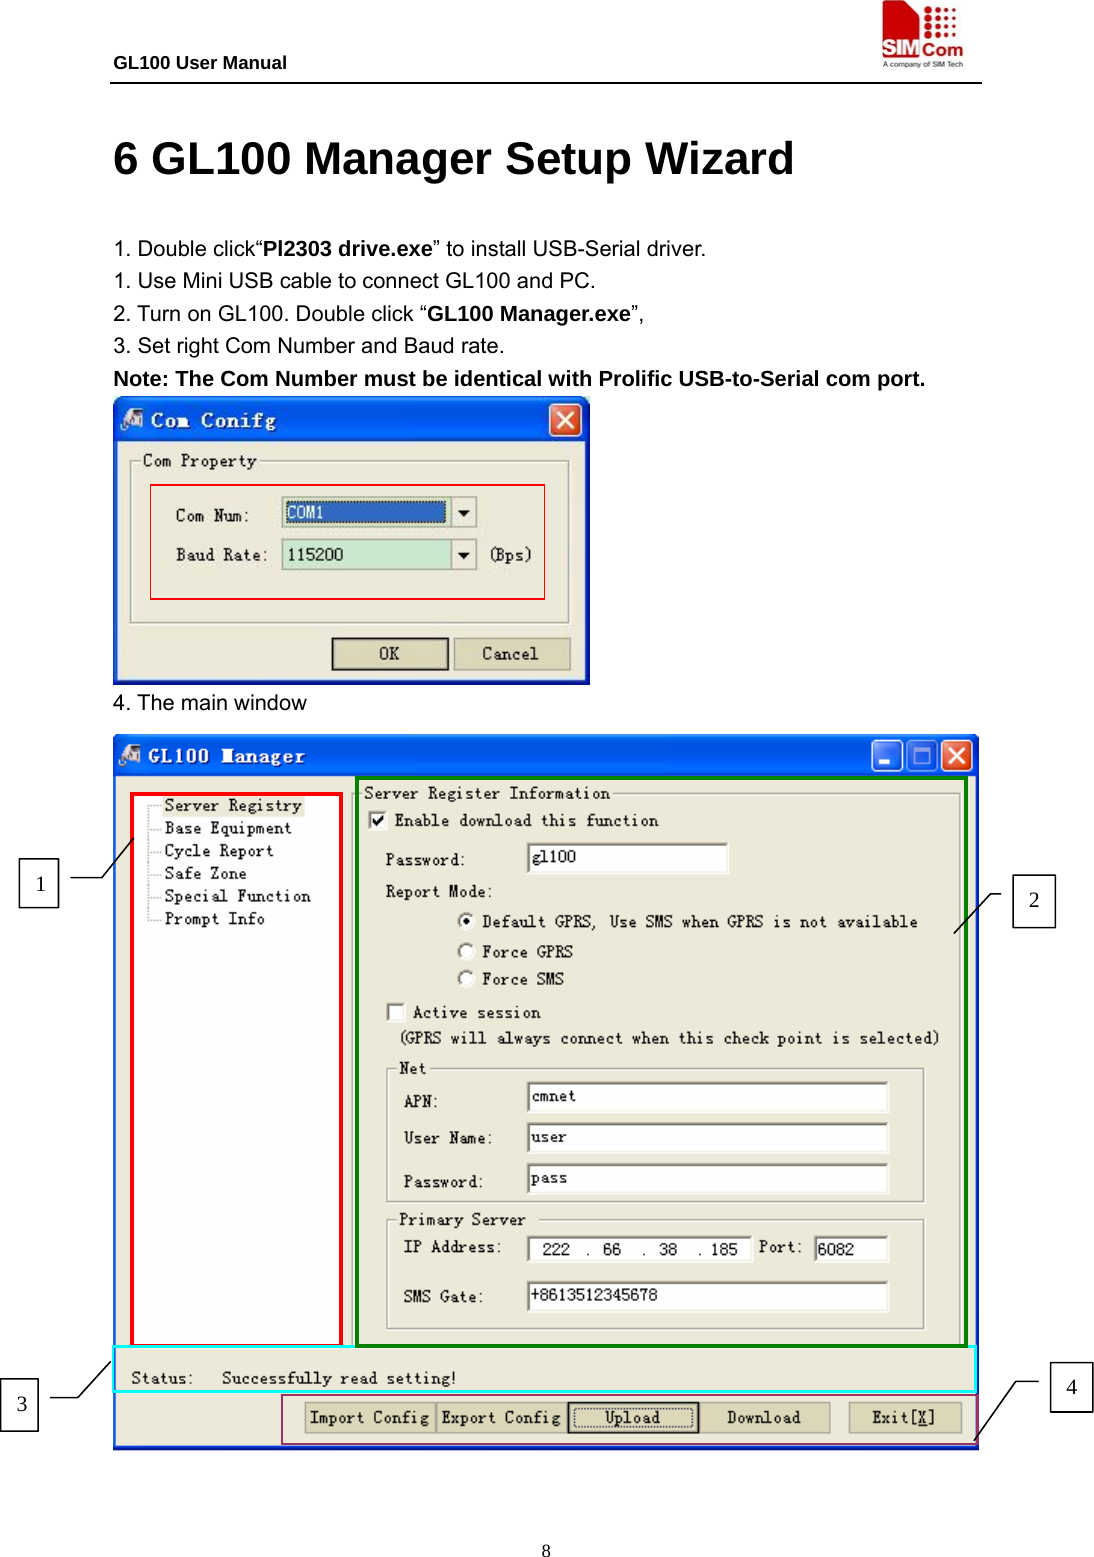 GL100 User Manual                                                                             8 6 GL100 Manager Setup Wizard 1. Double click“Pl2303 drive.exe” to install USB-Serial driver. 1. Use Mini USB cable to connect GL100 and PC.   2. Turn on GL100. Double click “GL100 Manager.exe”, 3. Set right Com Number and Baud rate.   Note: The Com Number must be identical with Prolific USB-to-Serial com port.  4. The main window  1 3  42